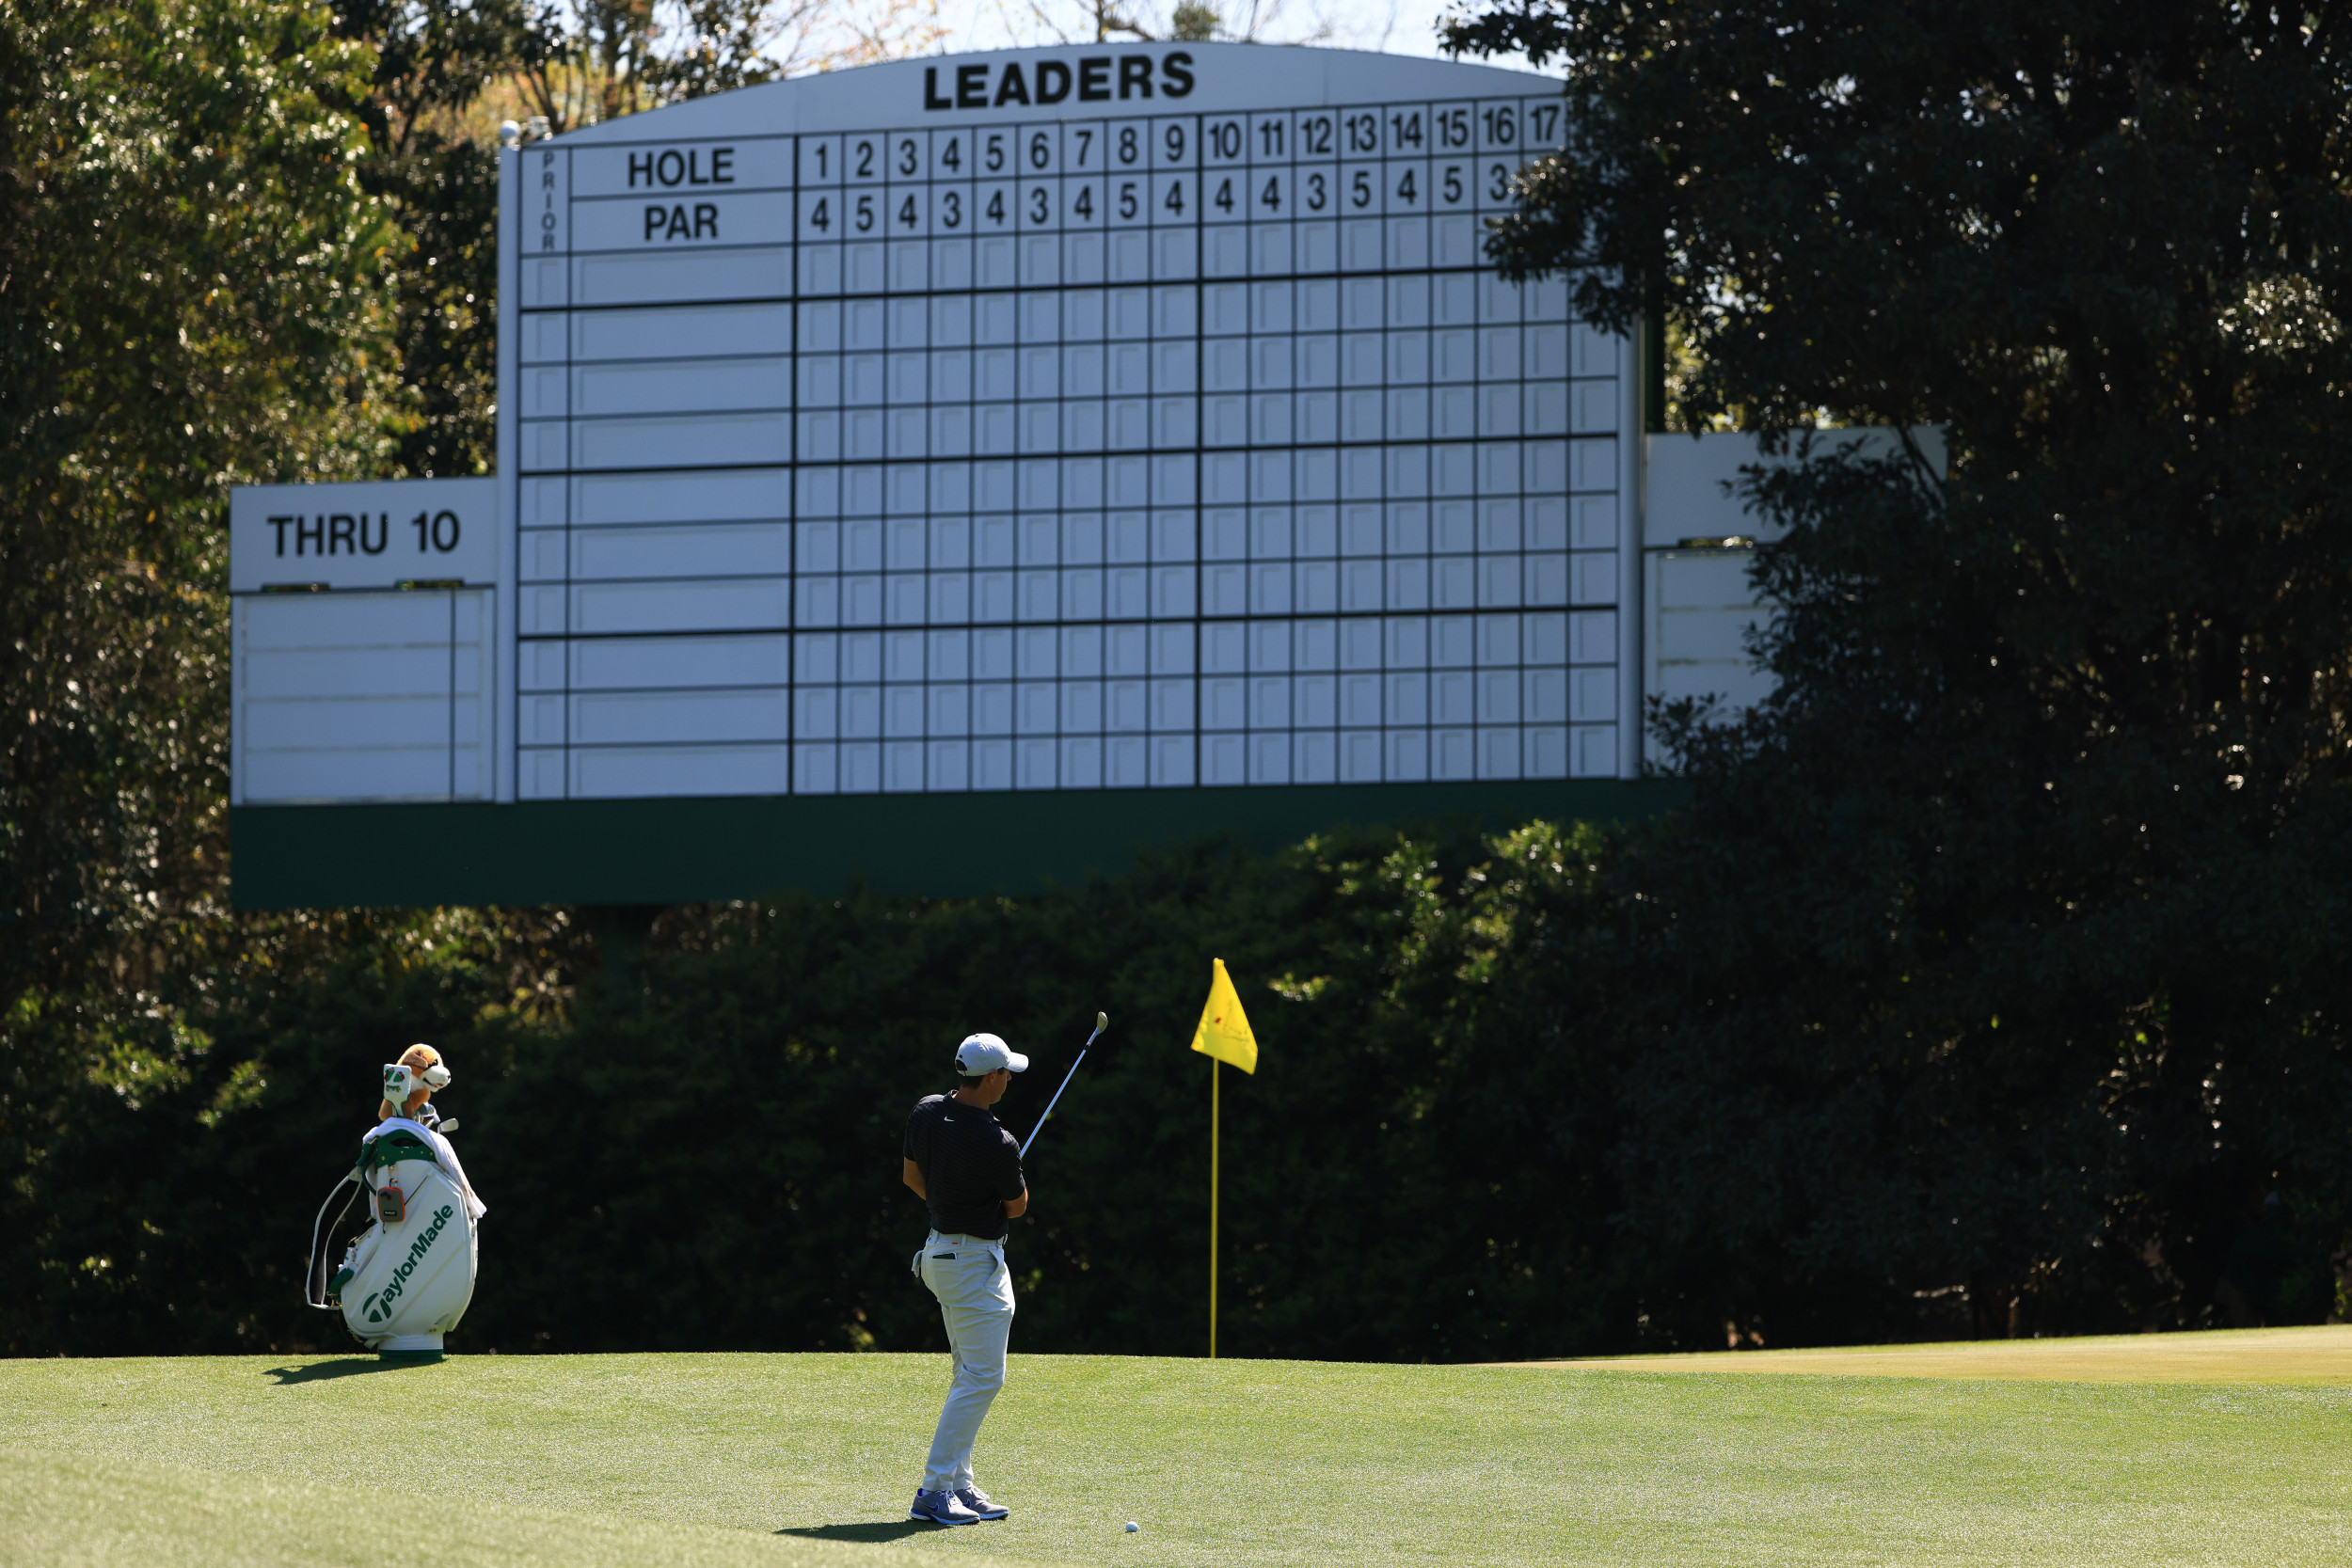 When Is The Masters 2021? Dates, How to Watch on TV and Online